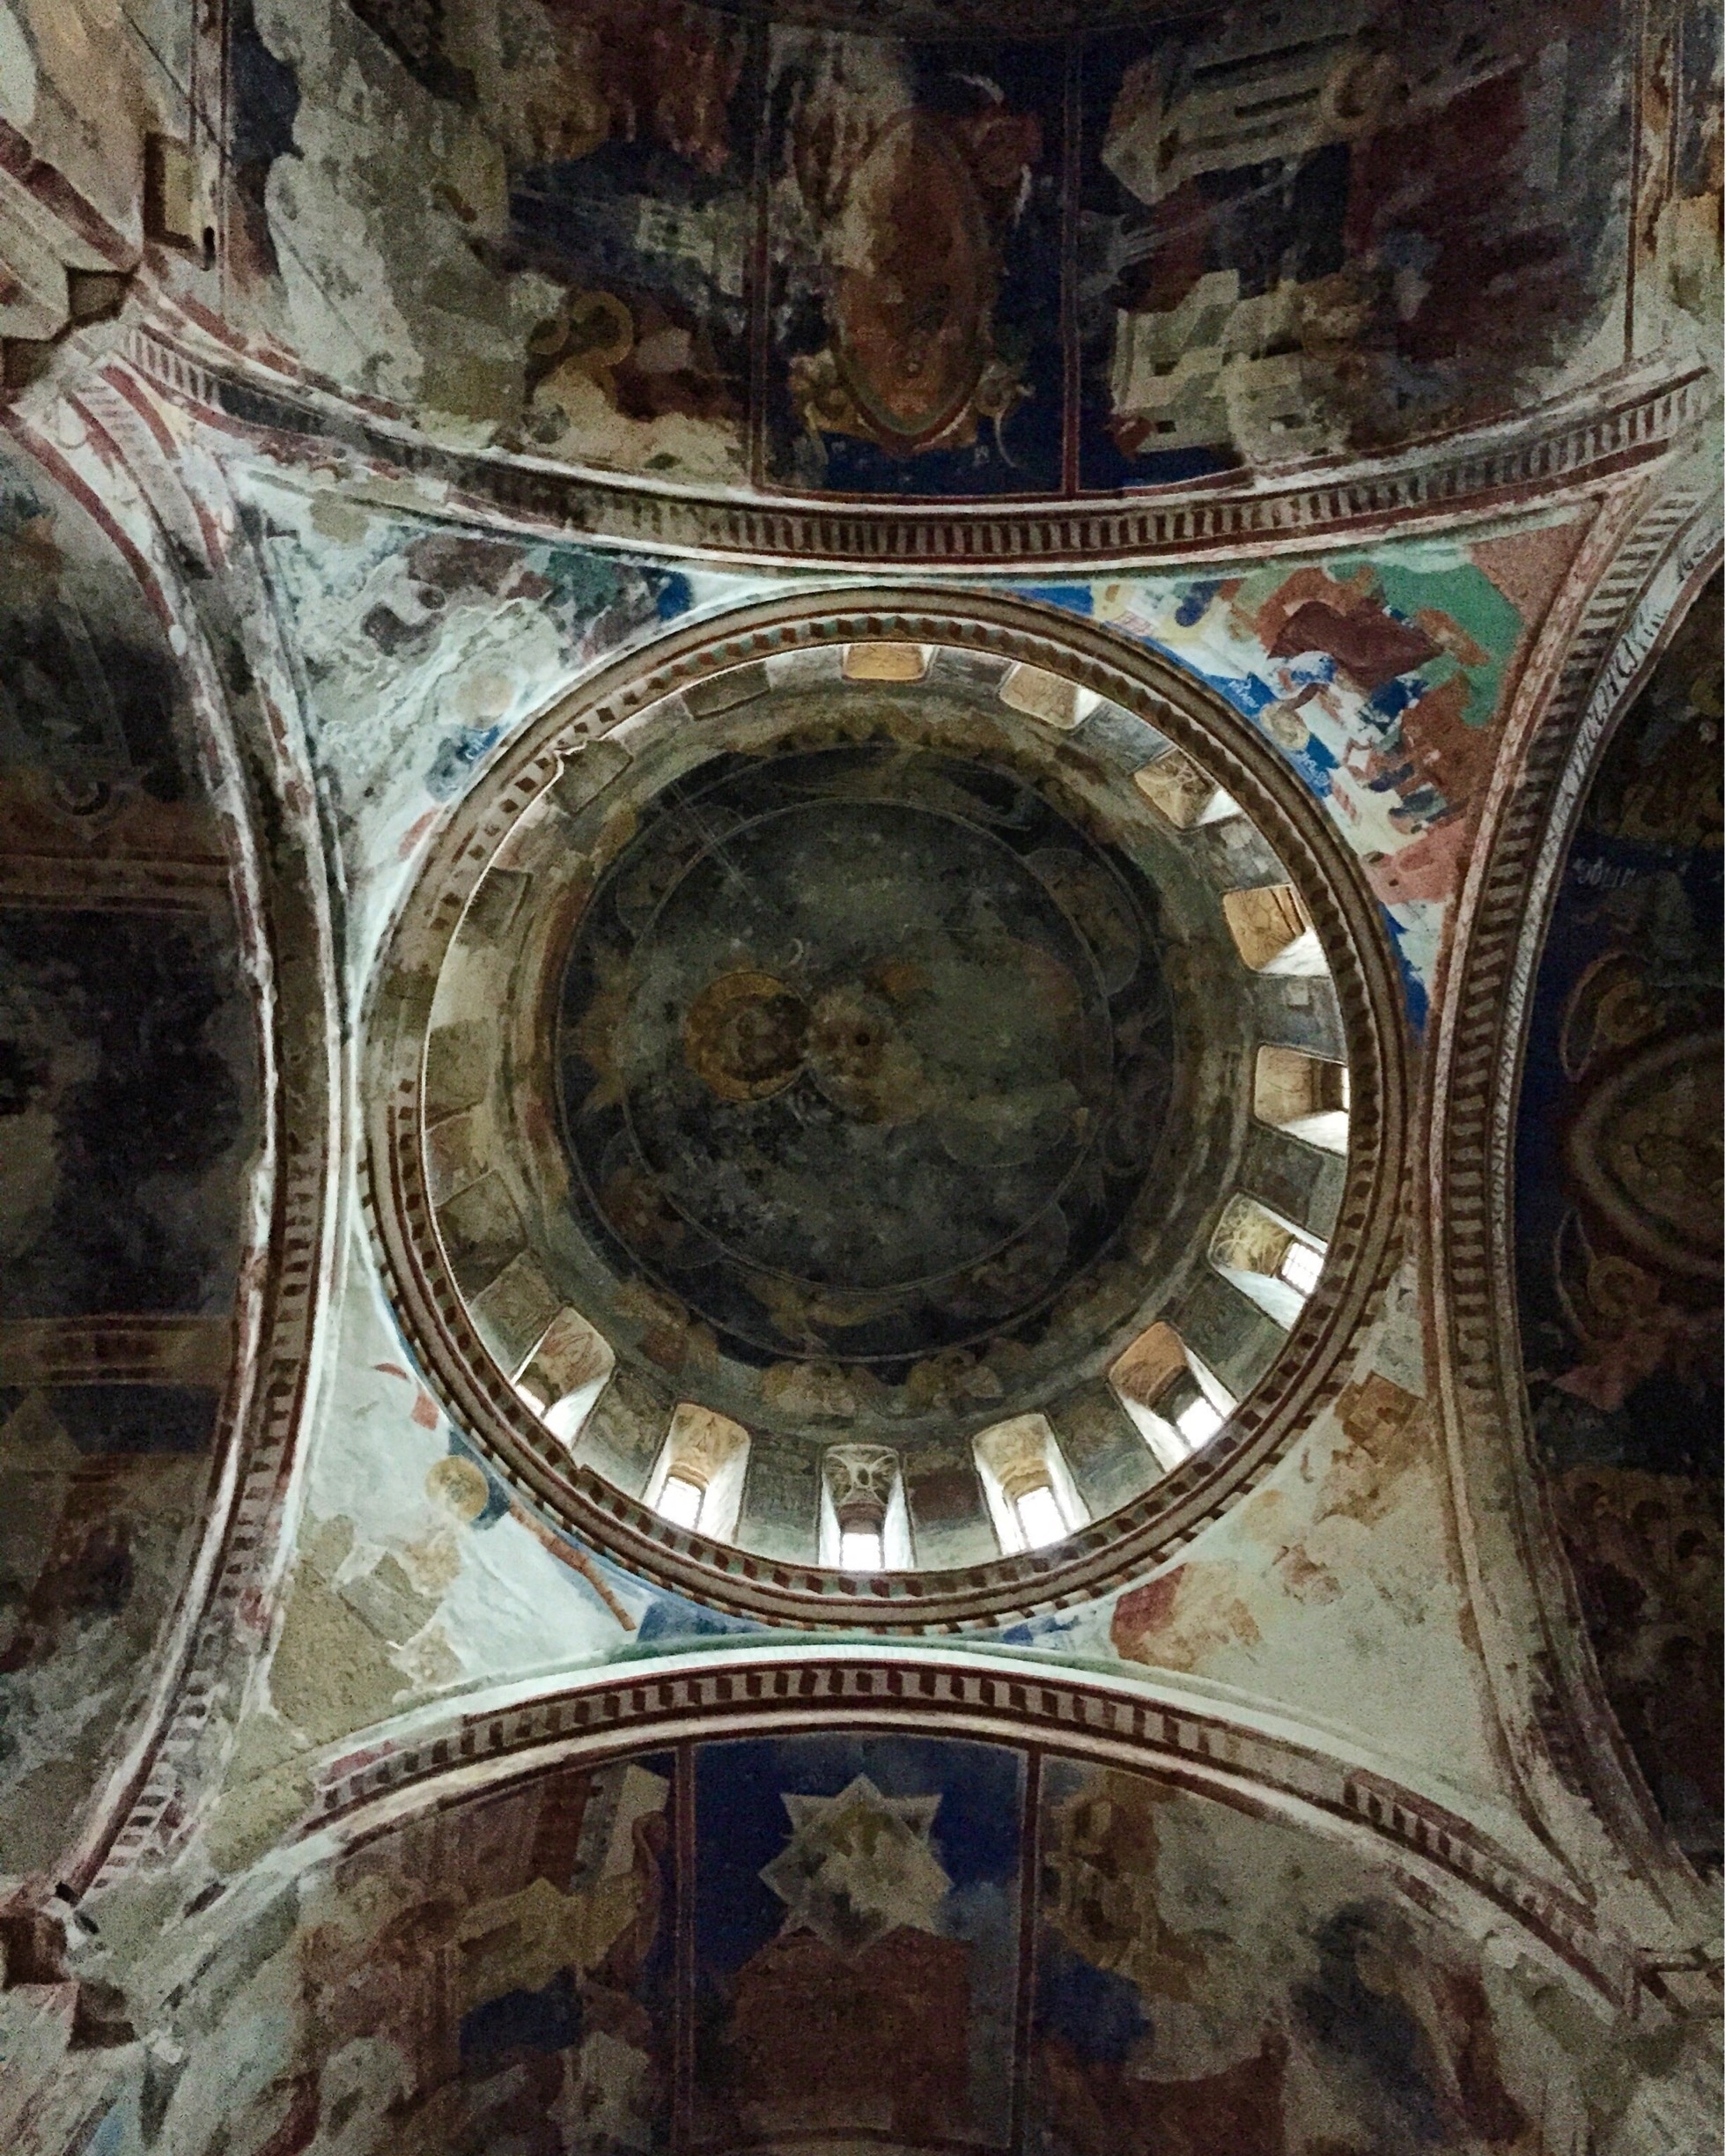 A beautiful church. Beautiful frescoes all over. I was the only one there at the time, it was very quiet.